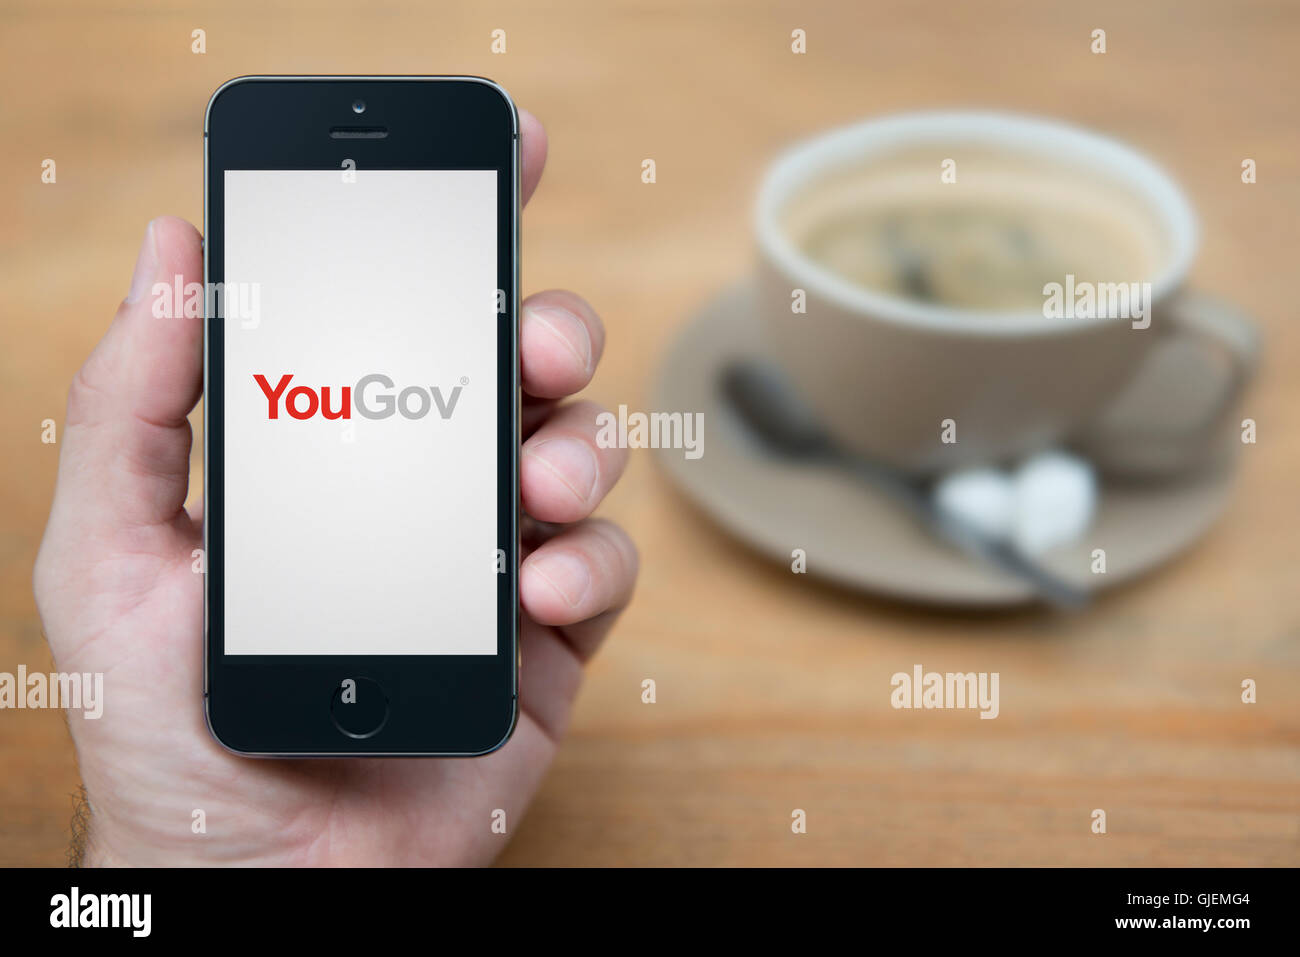 A man looks at his iPhone which displays the YouGov logo, while sat with a cup of coffee (Editorial use only). Stock Photo